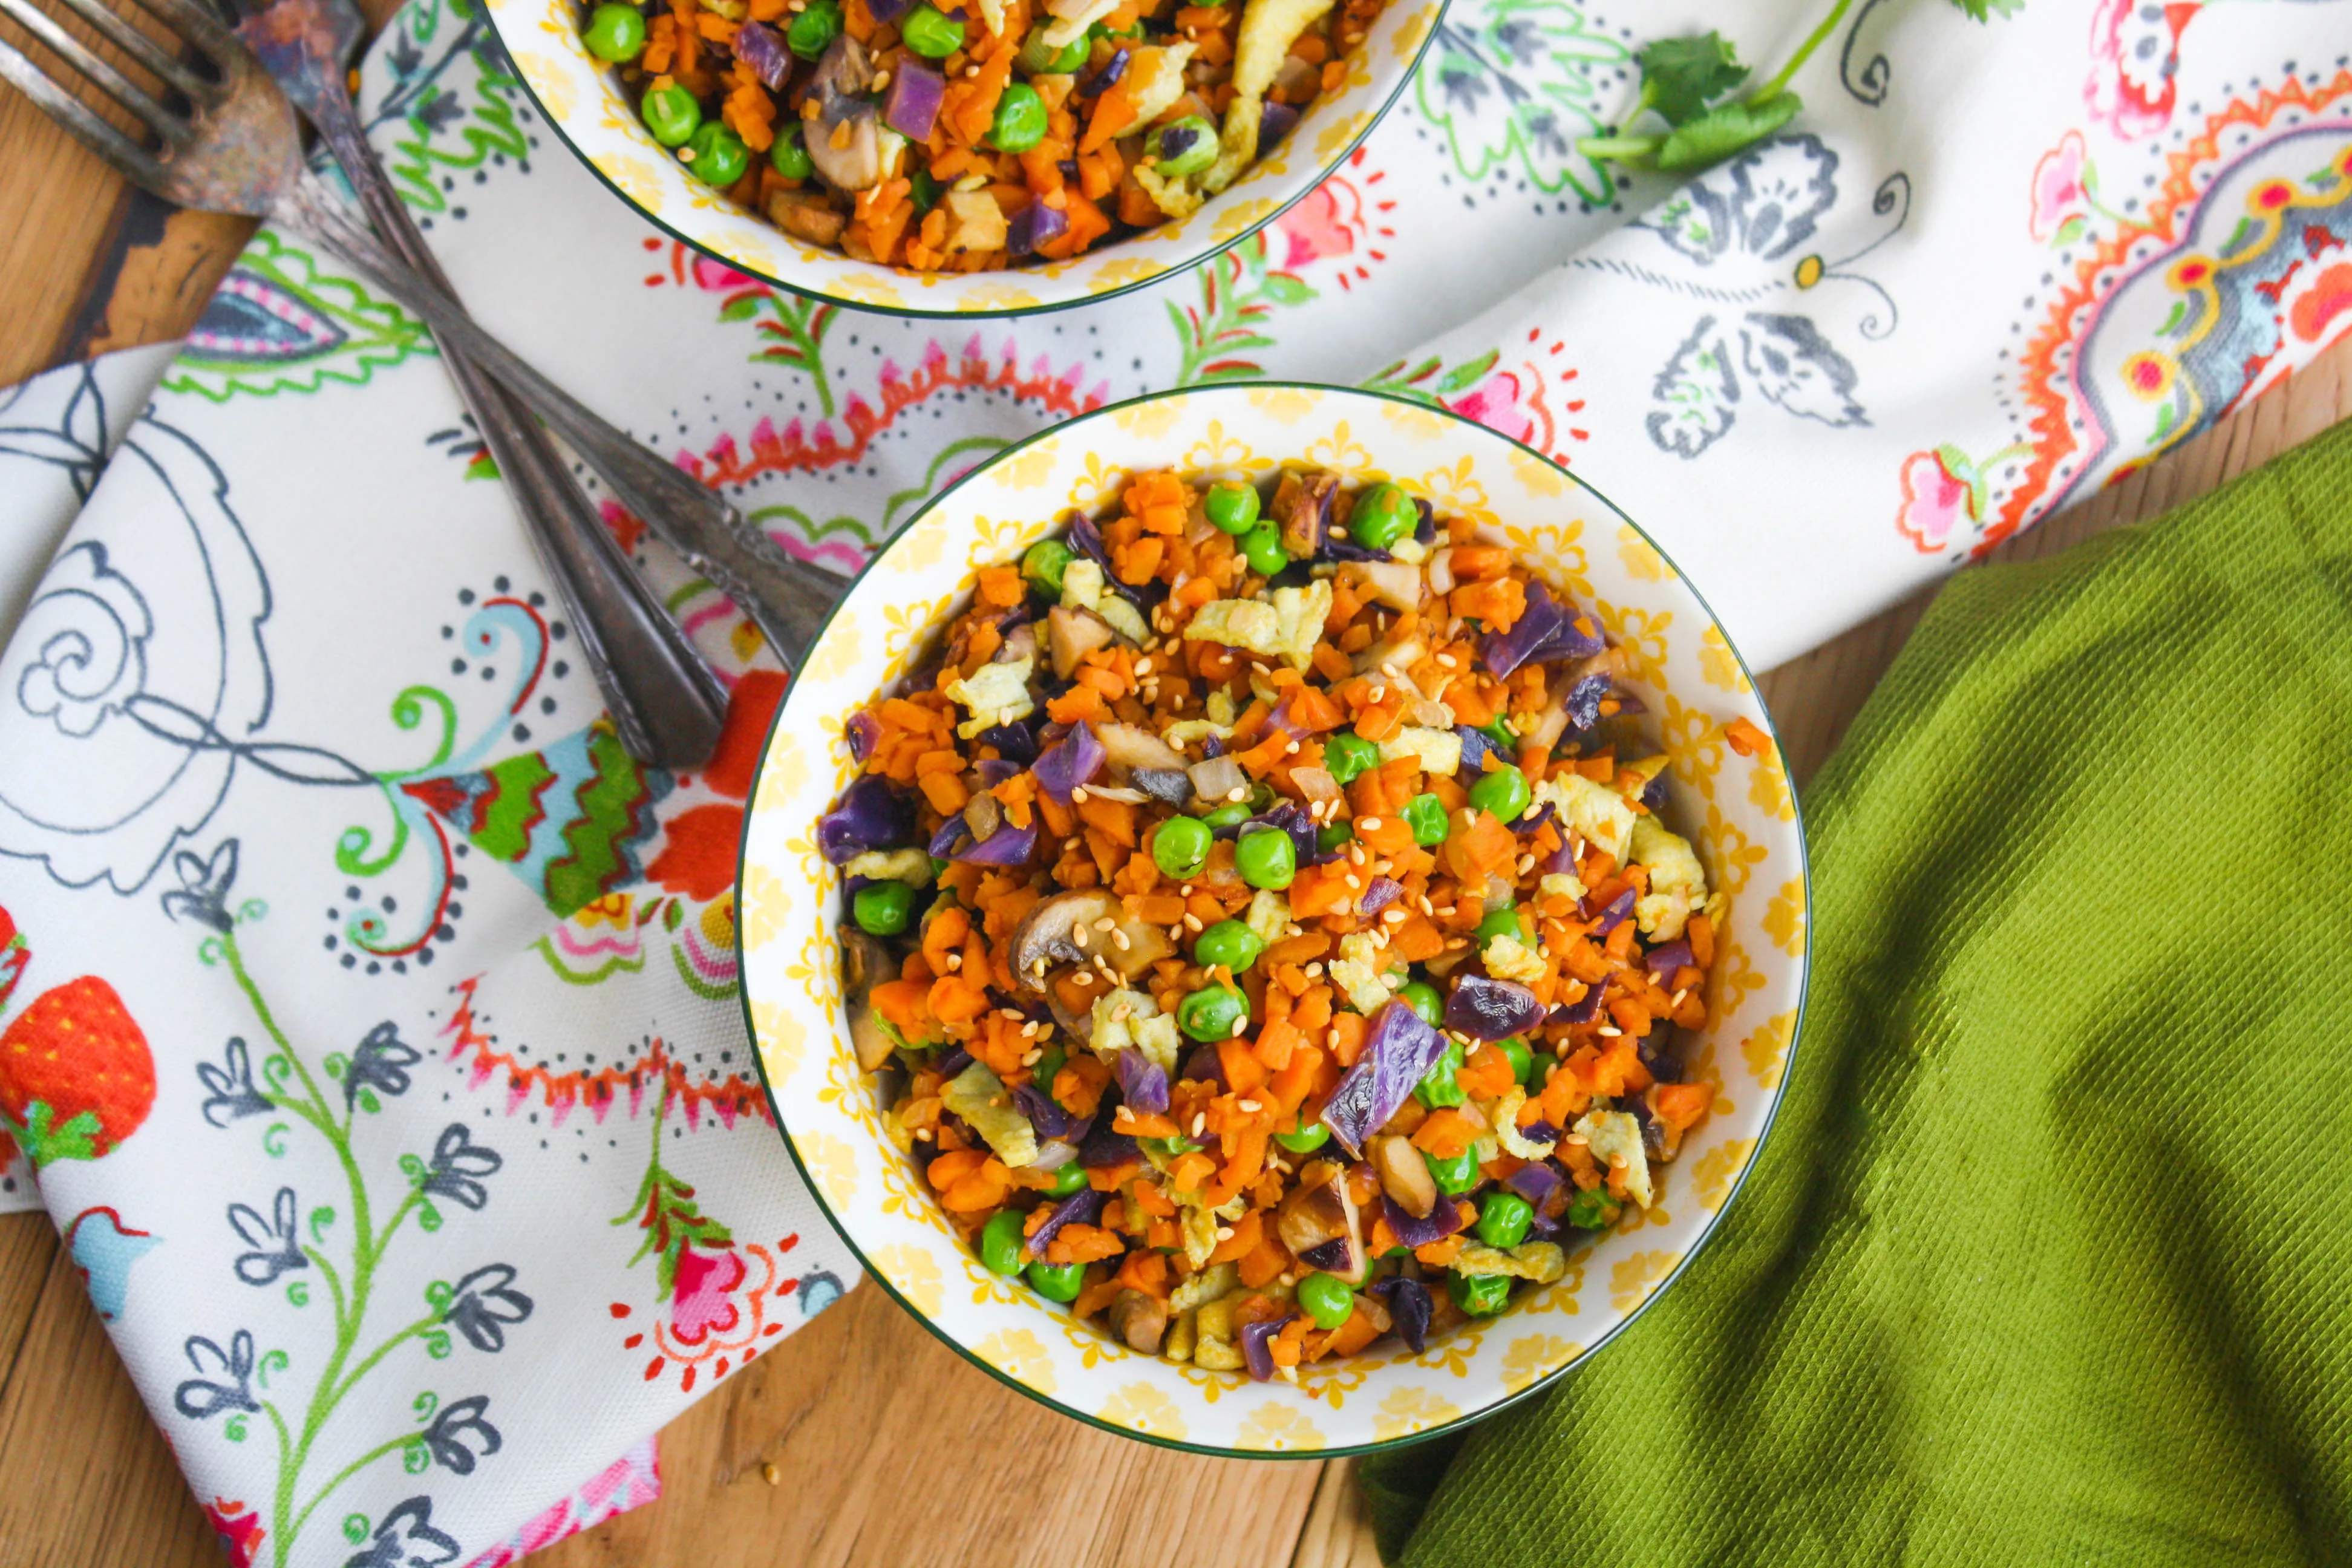 Sweet Potato "Fried Rice" is a healthy side or main dish -- you choose! You'll love the flavors and colors!